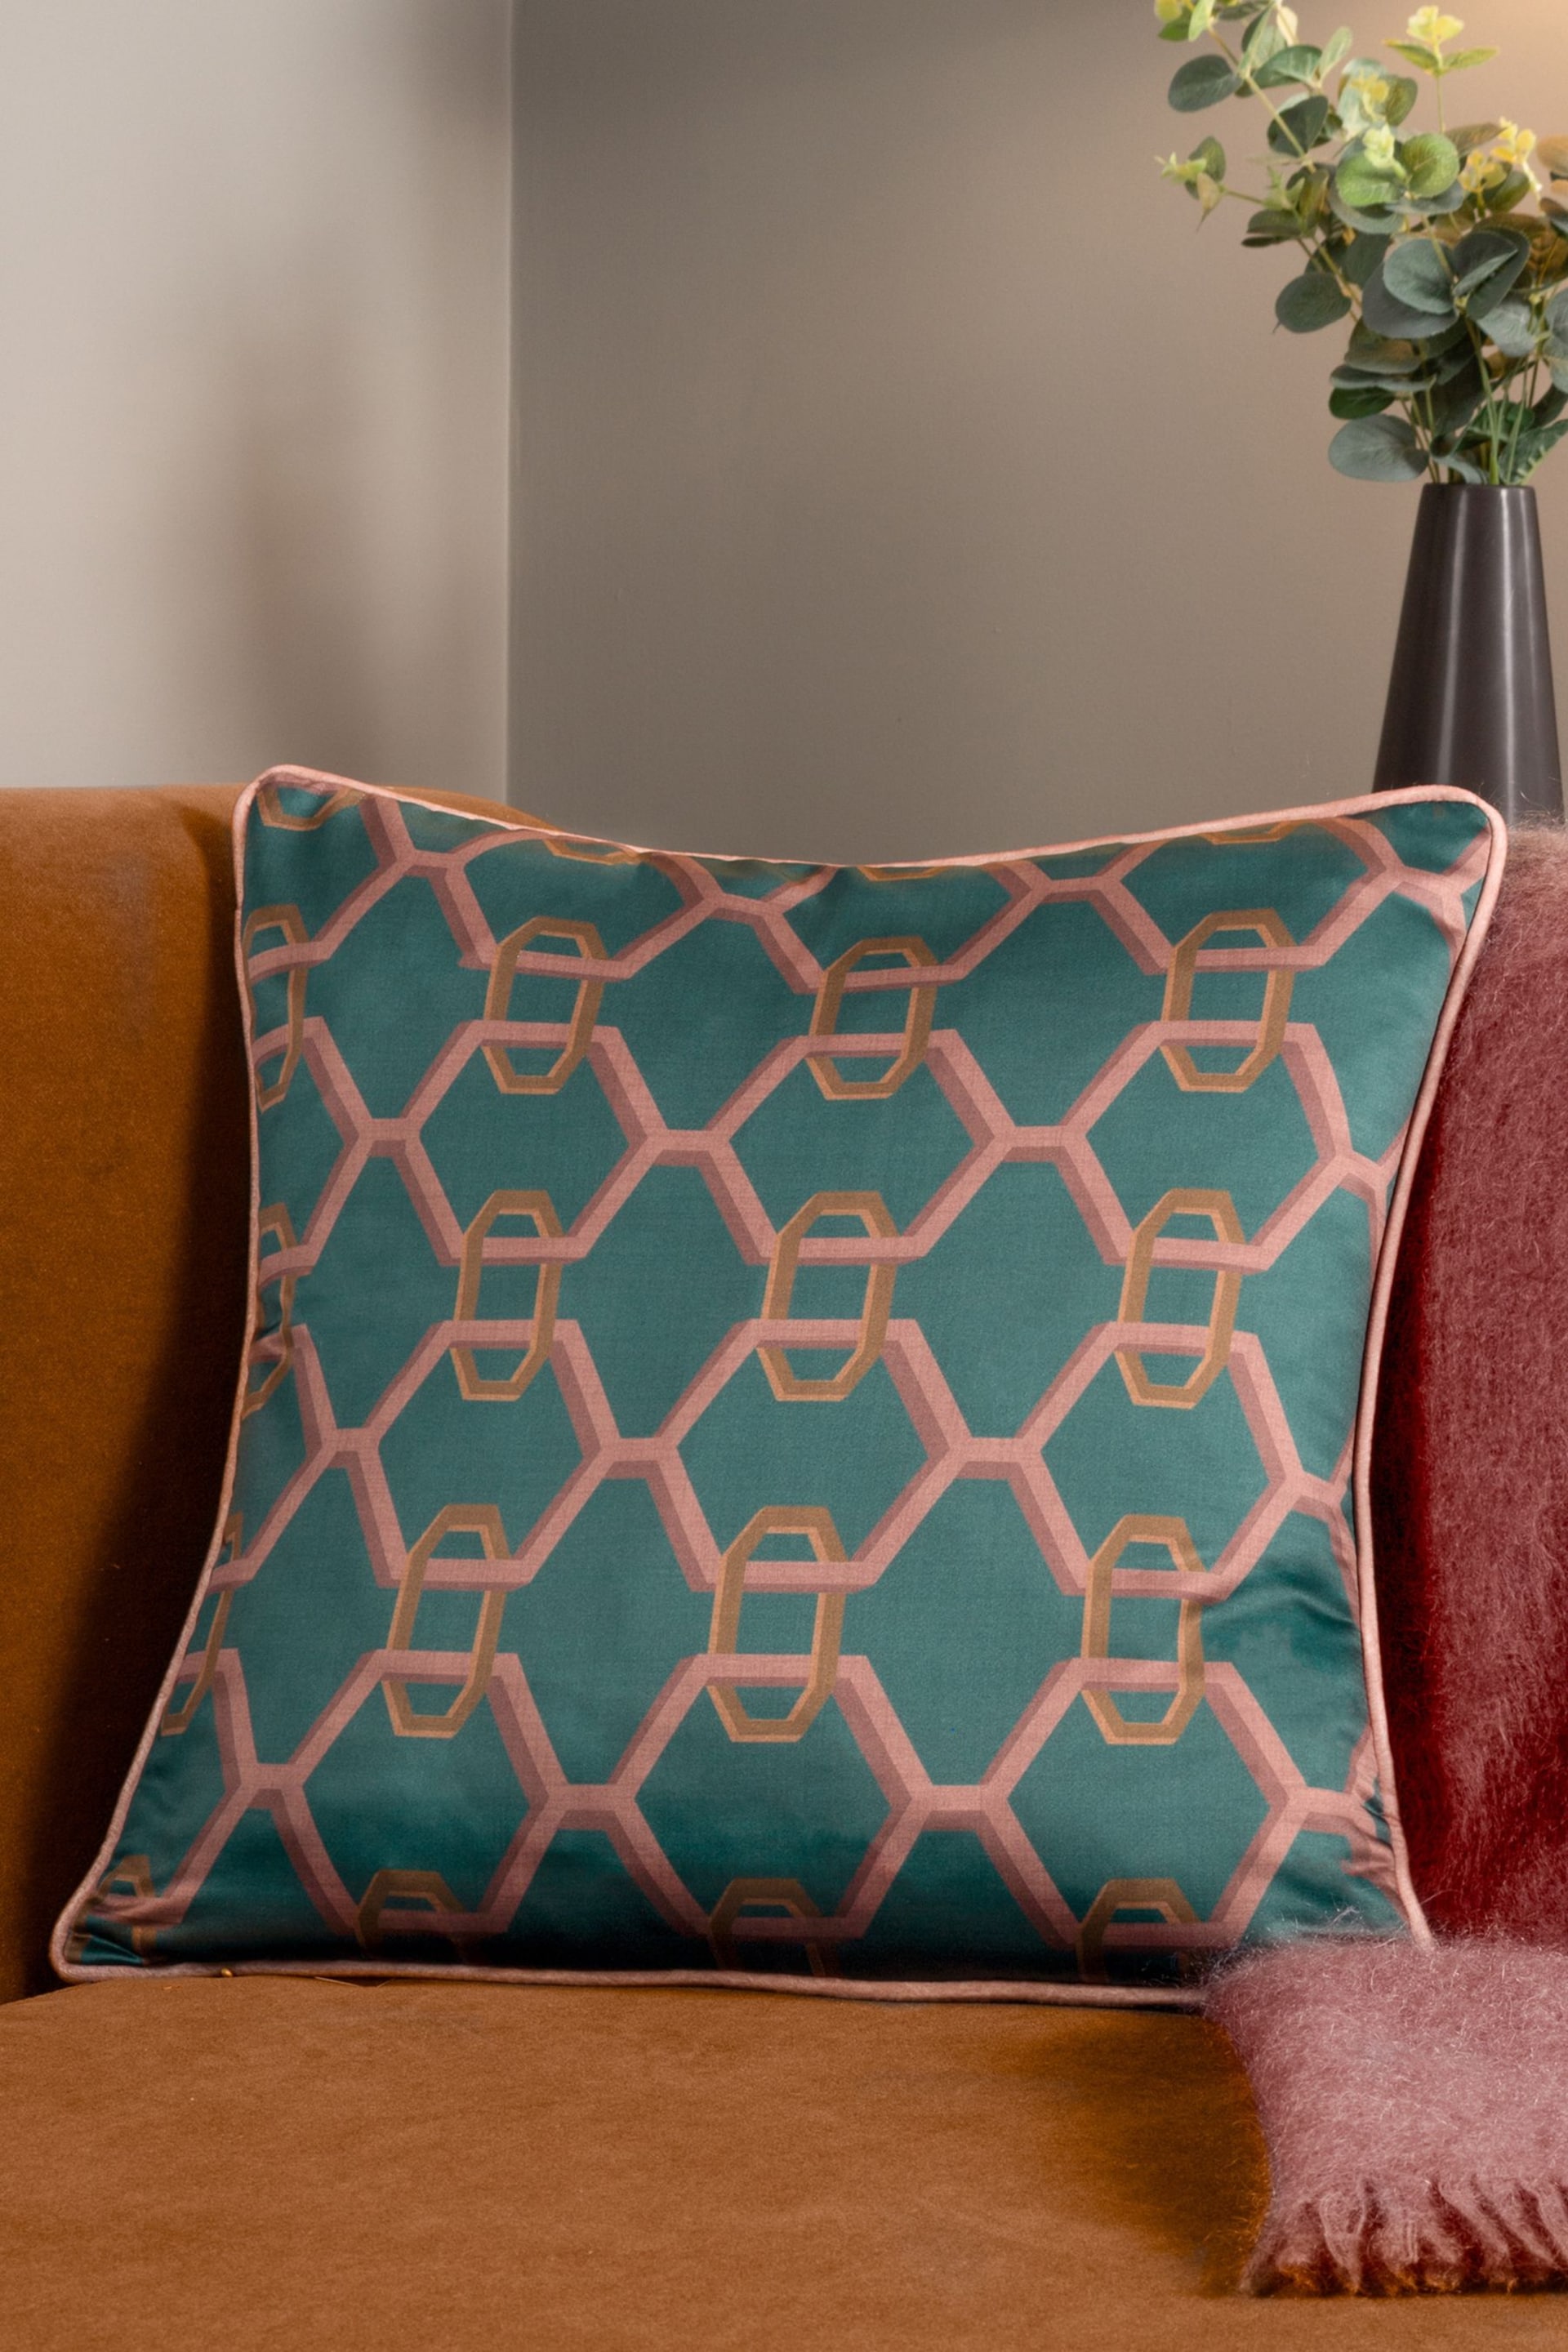 Paoletti Blue Carnaby Chain Geometric Satin Polyester Filled Cushion - Image 1 of 5